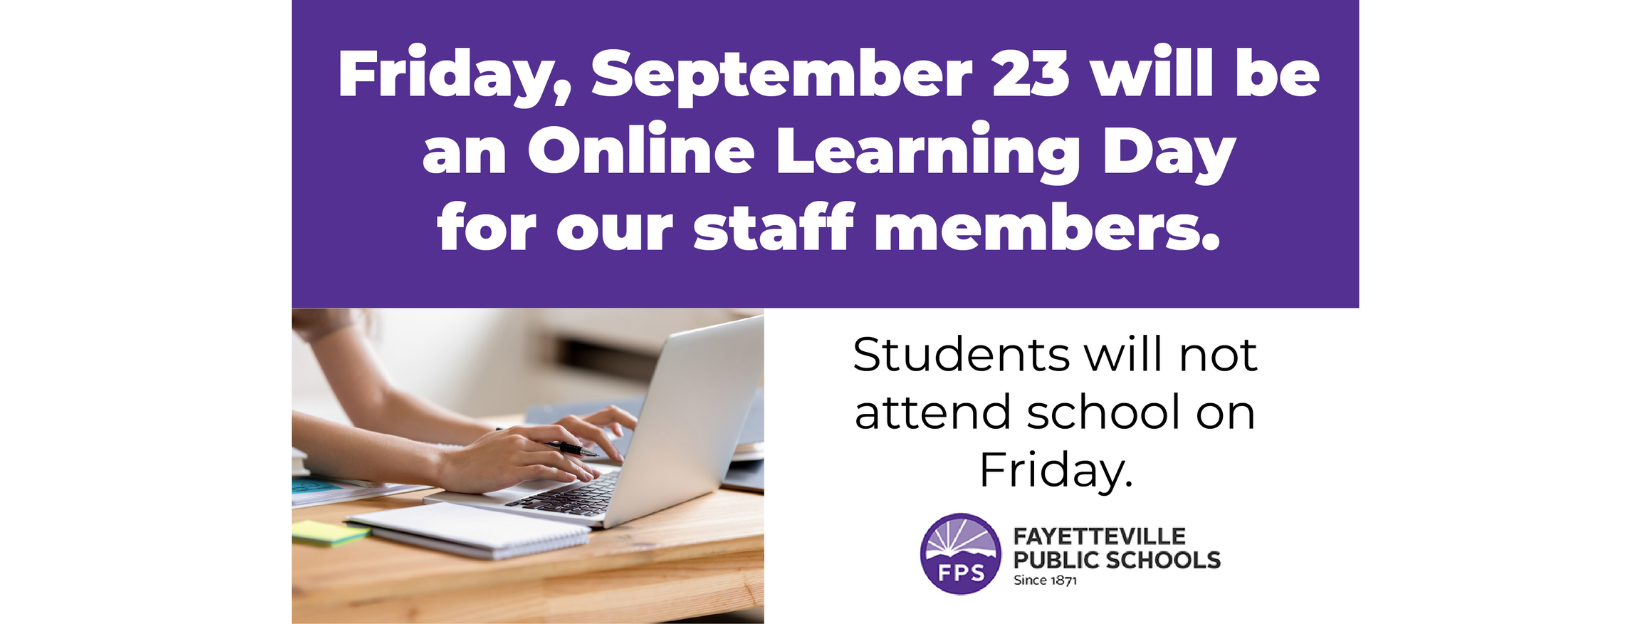 Friday, September 23 will be an Online Learning Day for our staff members. Students will not attend school on Friday.